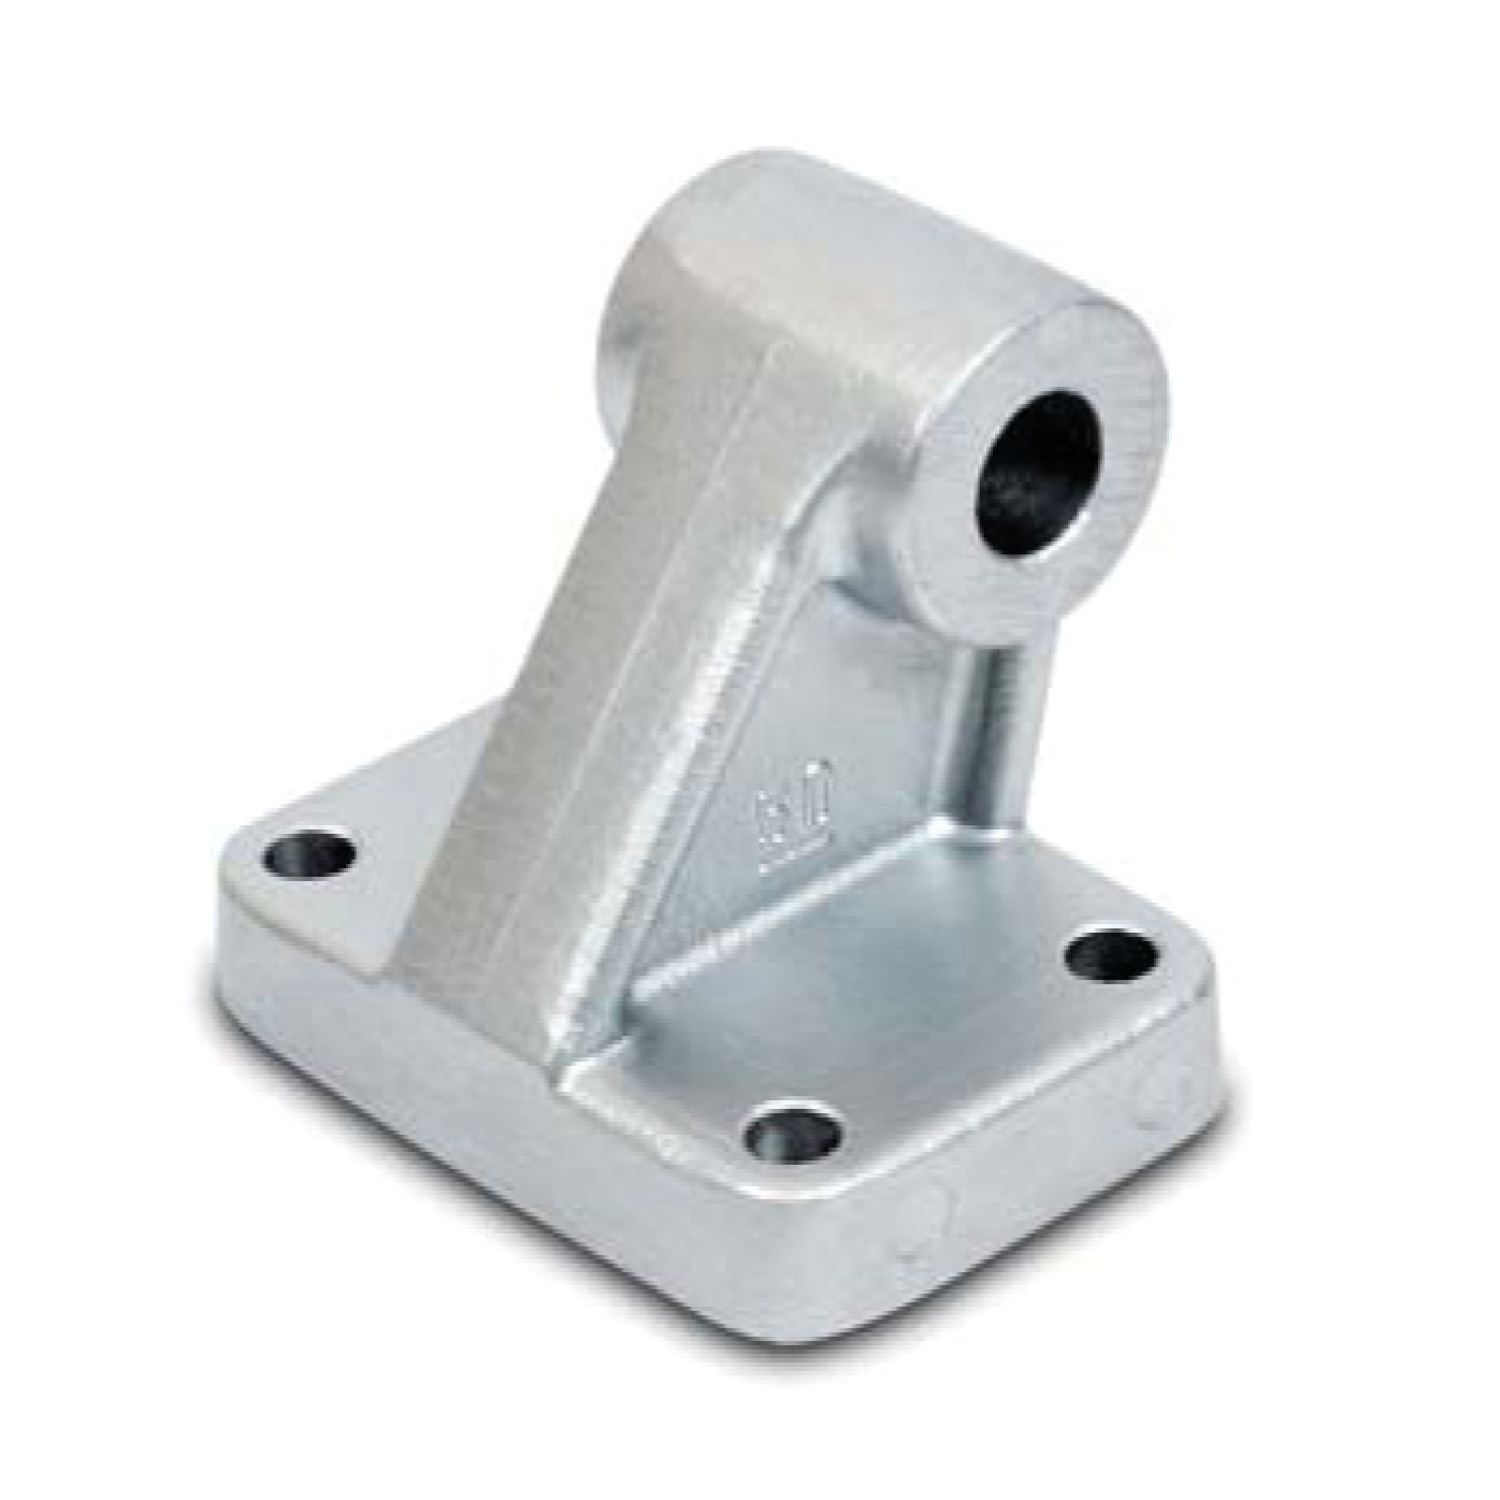 Product L4812, Air Cylinder Mounts - CETOP Series clevis mounting foot / 